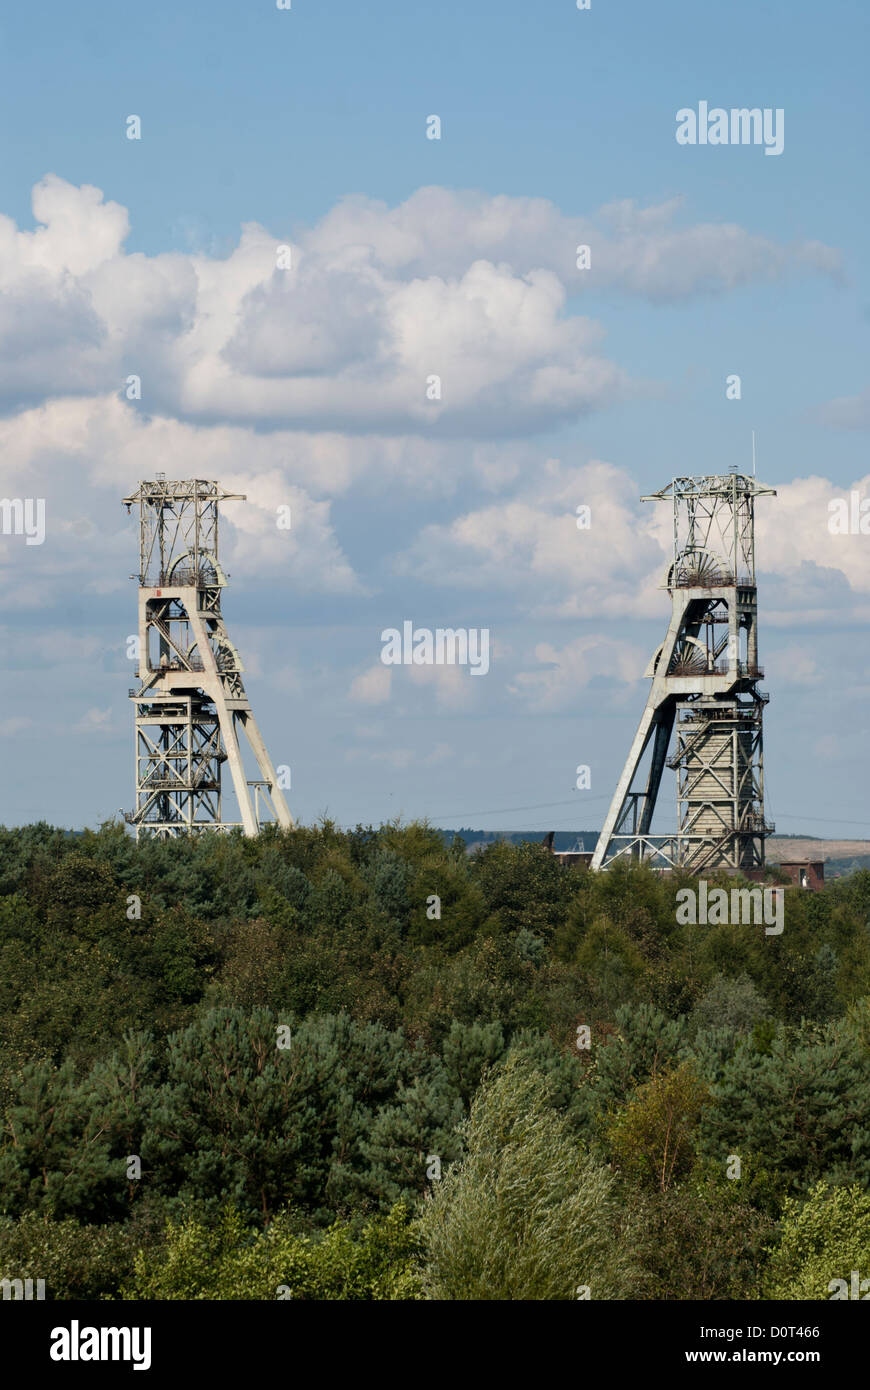 The view from Vicar Water Country Park looking out to Clipstone Colliery Headstocks, Clipstone, Nottinghamshire, UK. Stock Photo